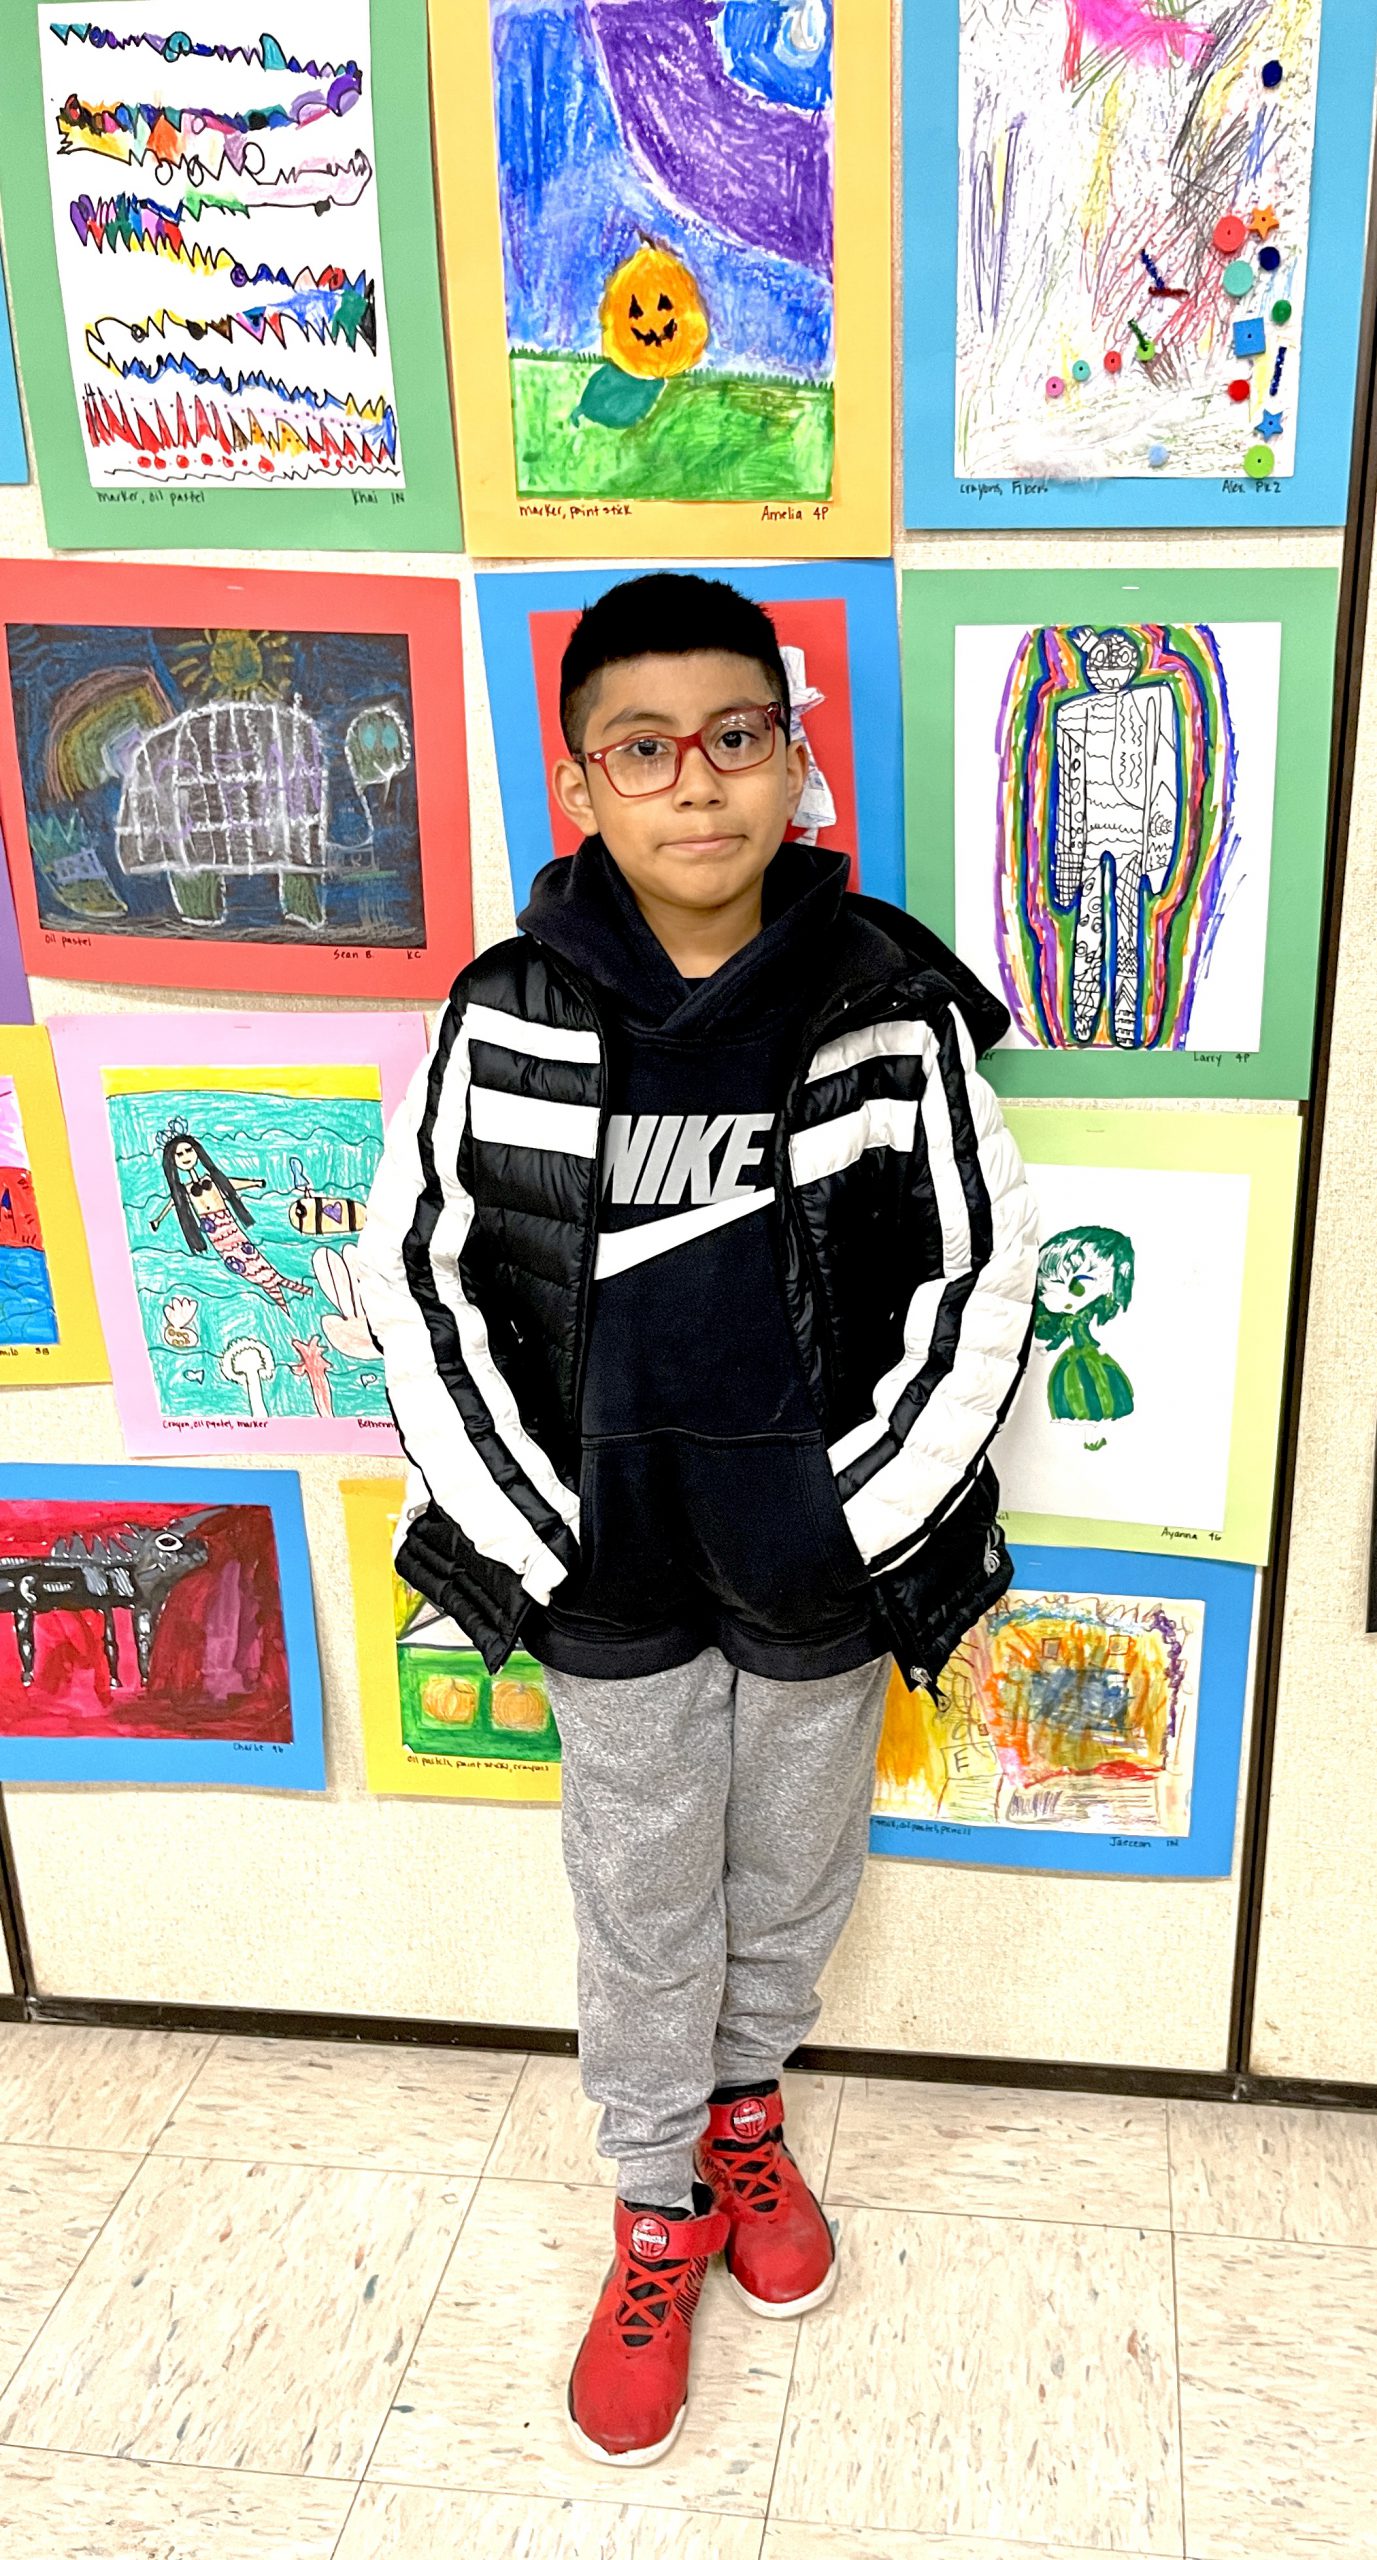 A boy wearing a black and white jacket and black shirt, glasses and dark hair  stands in front of a wall of artwork.